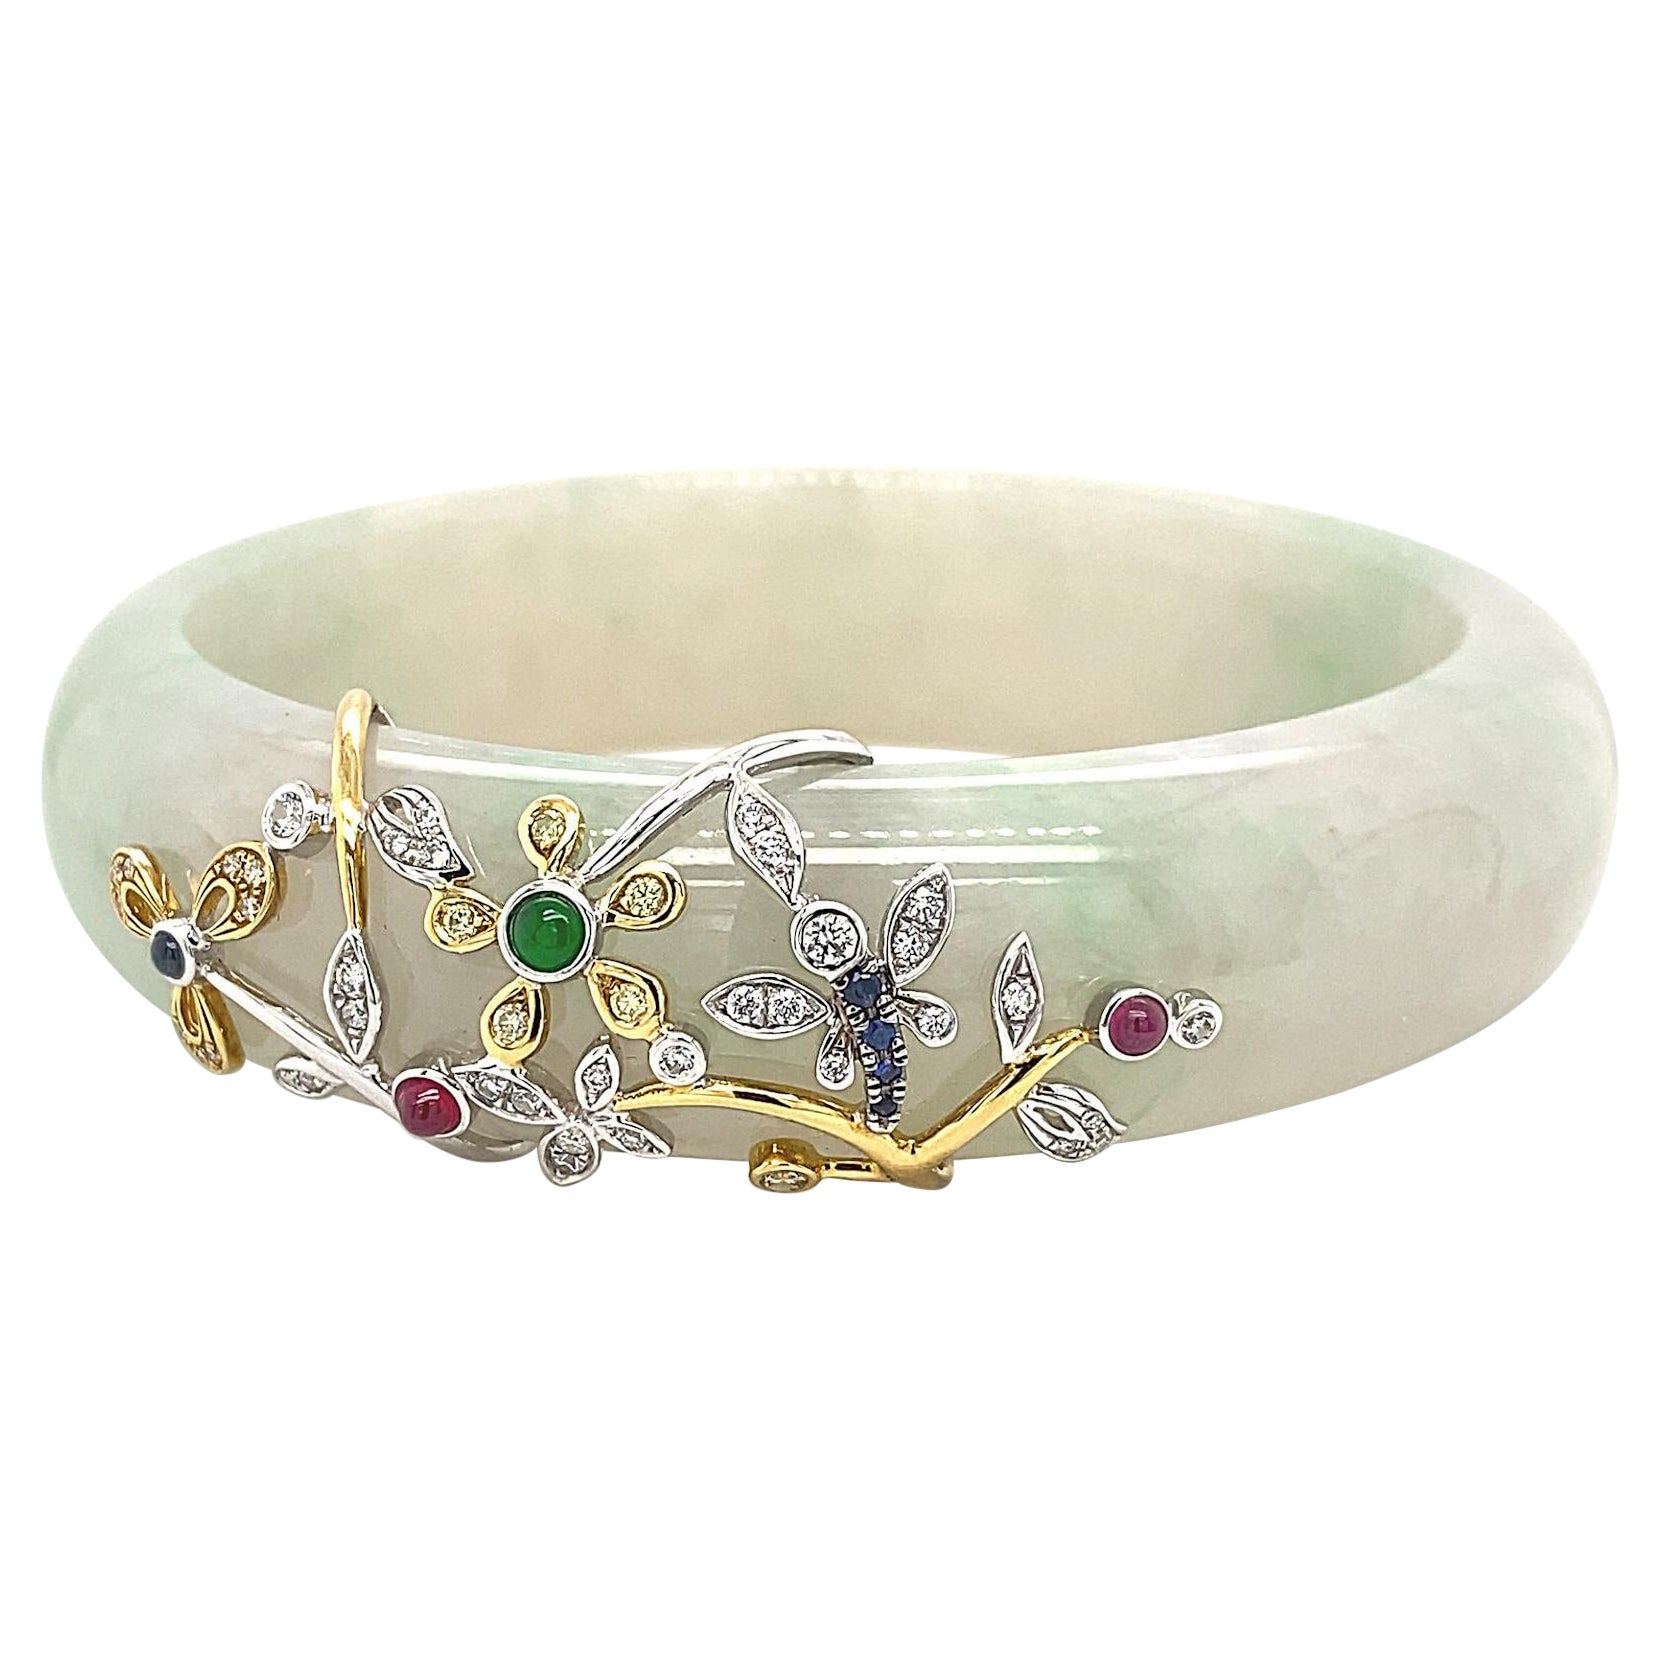 HKJSL Certified Jade 'Botanica' Bangle by Dilys' in 18K Yellow & White Gold